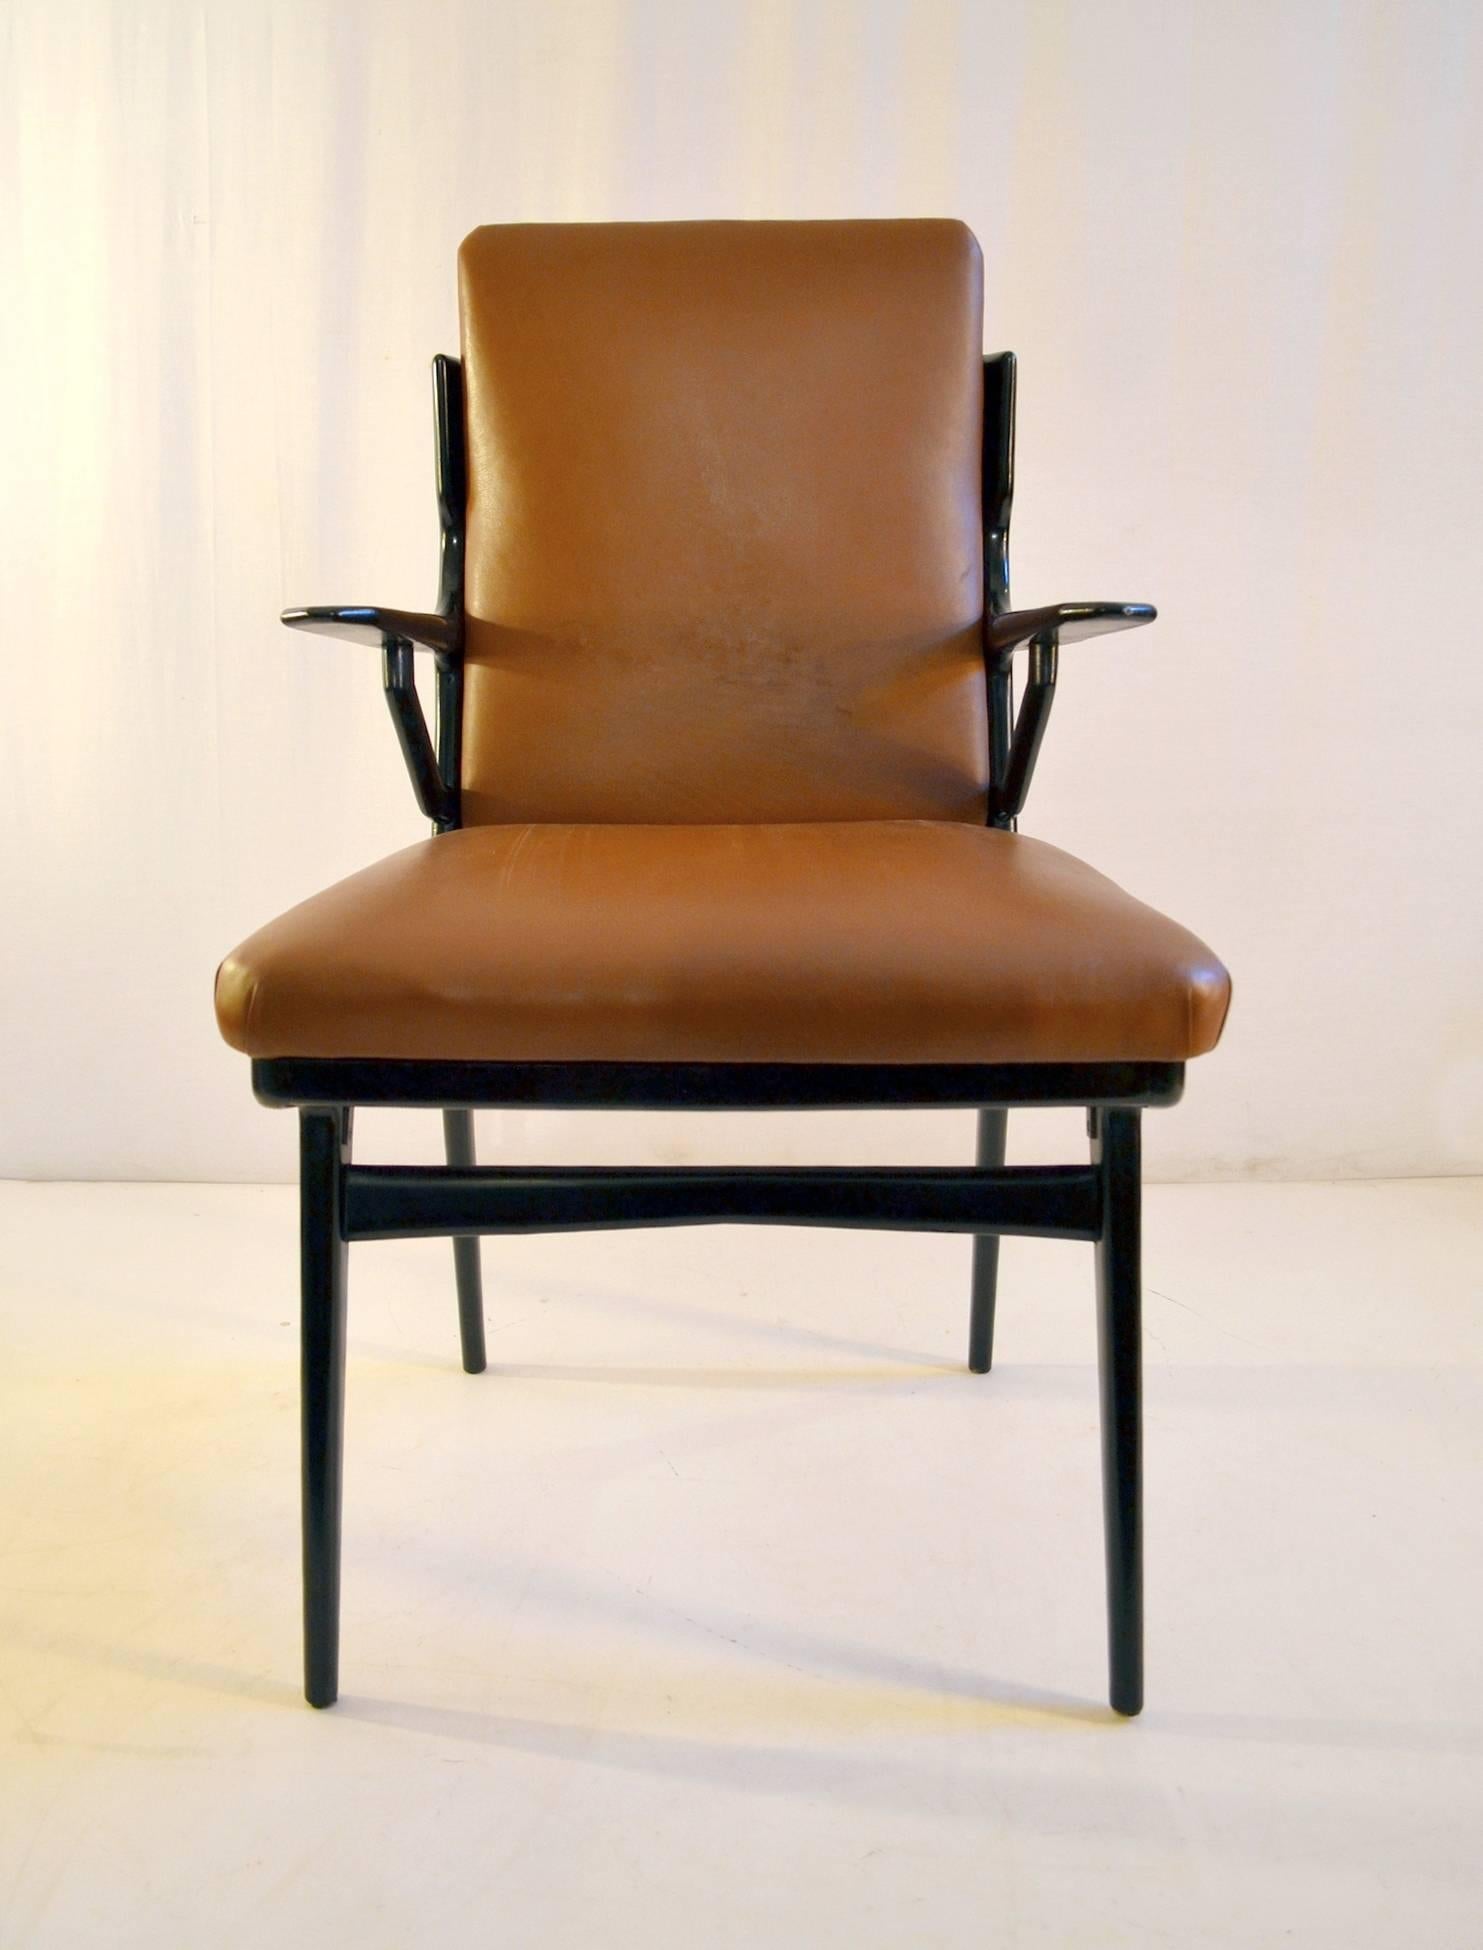 A desk chair in the manner of Carlo Di Carli in wood and leather. The wood has been restored and the leather is good but with some use to the inner back. Stabile and robust and very good craftsmanship with an unusual design. Seat height is ca 50 cm.